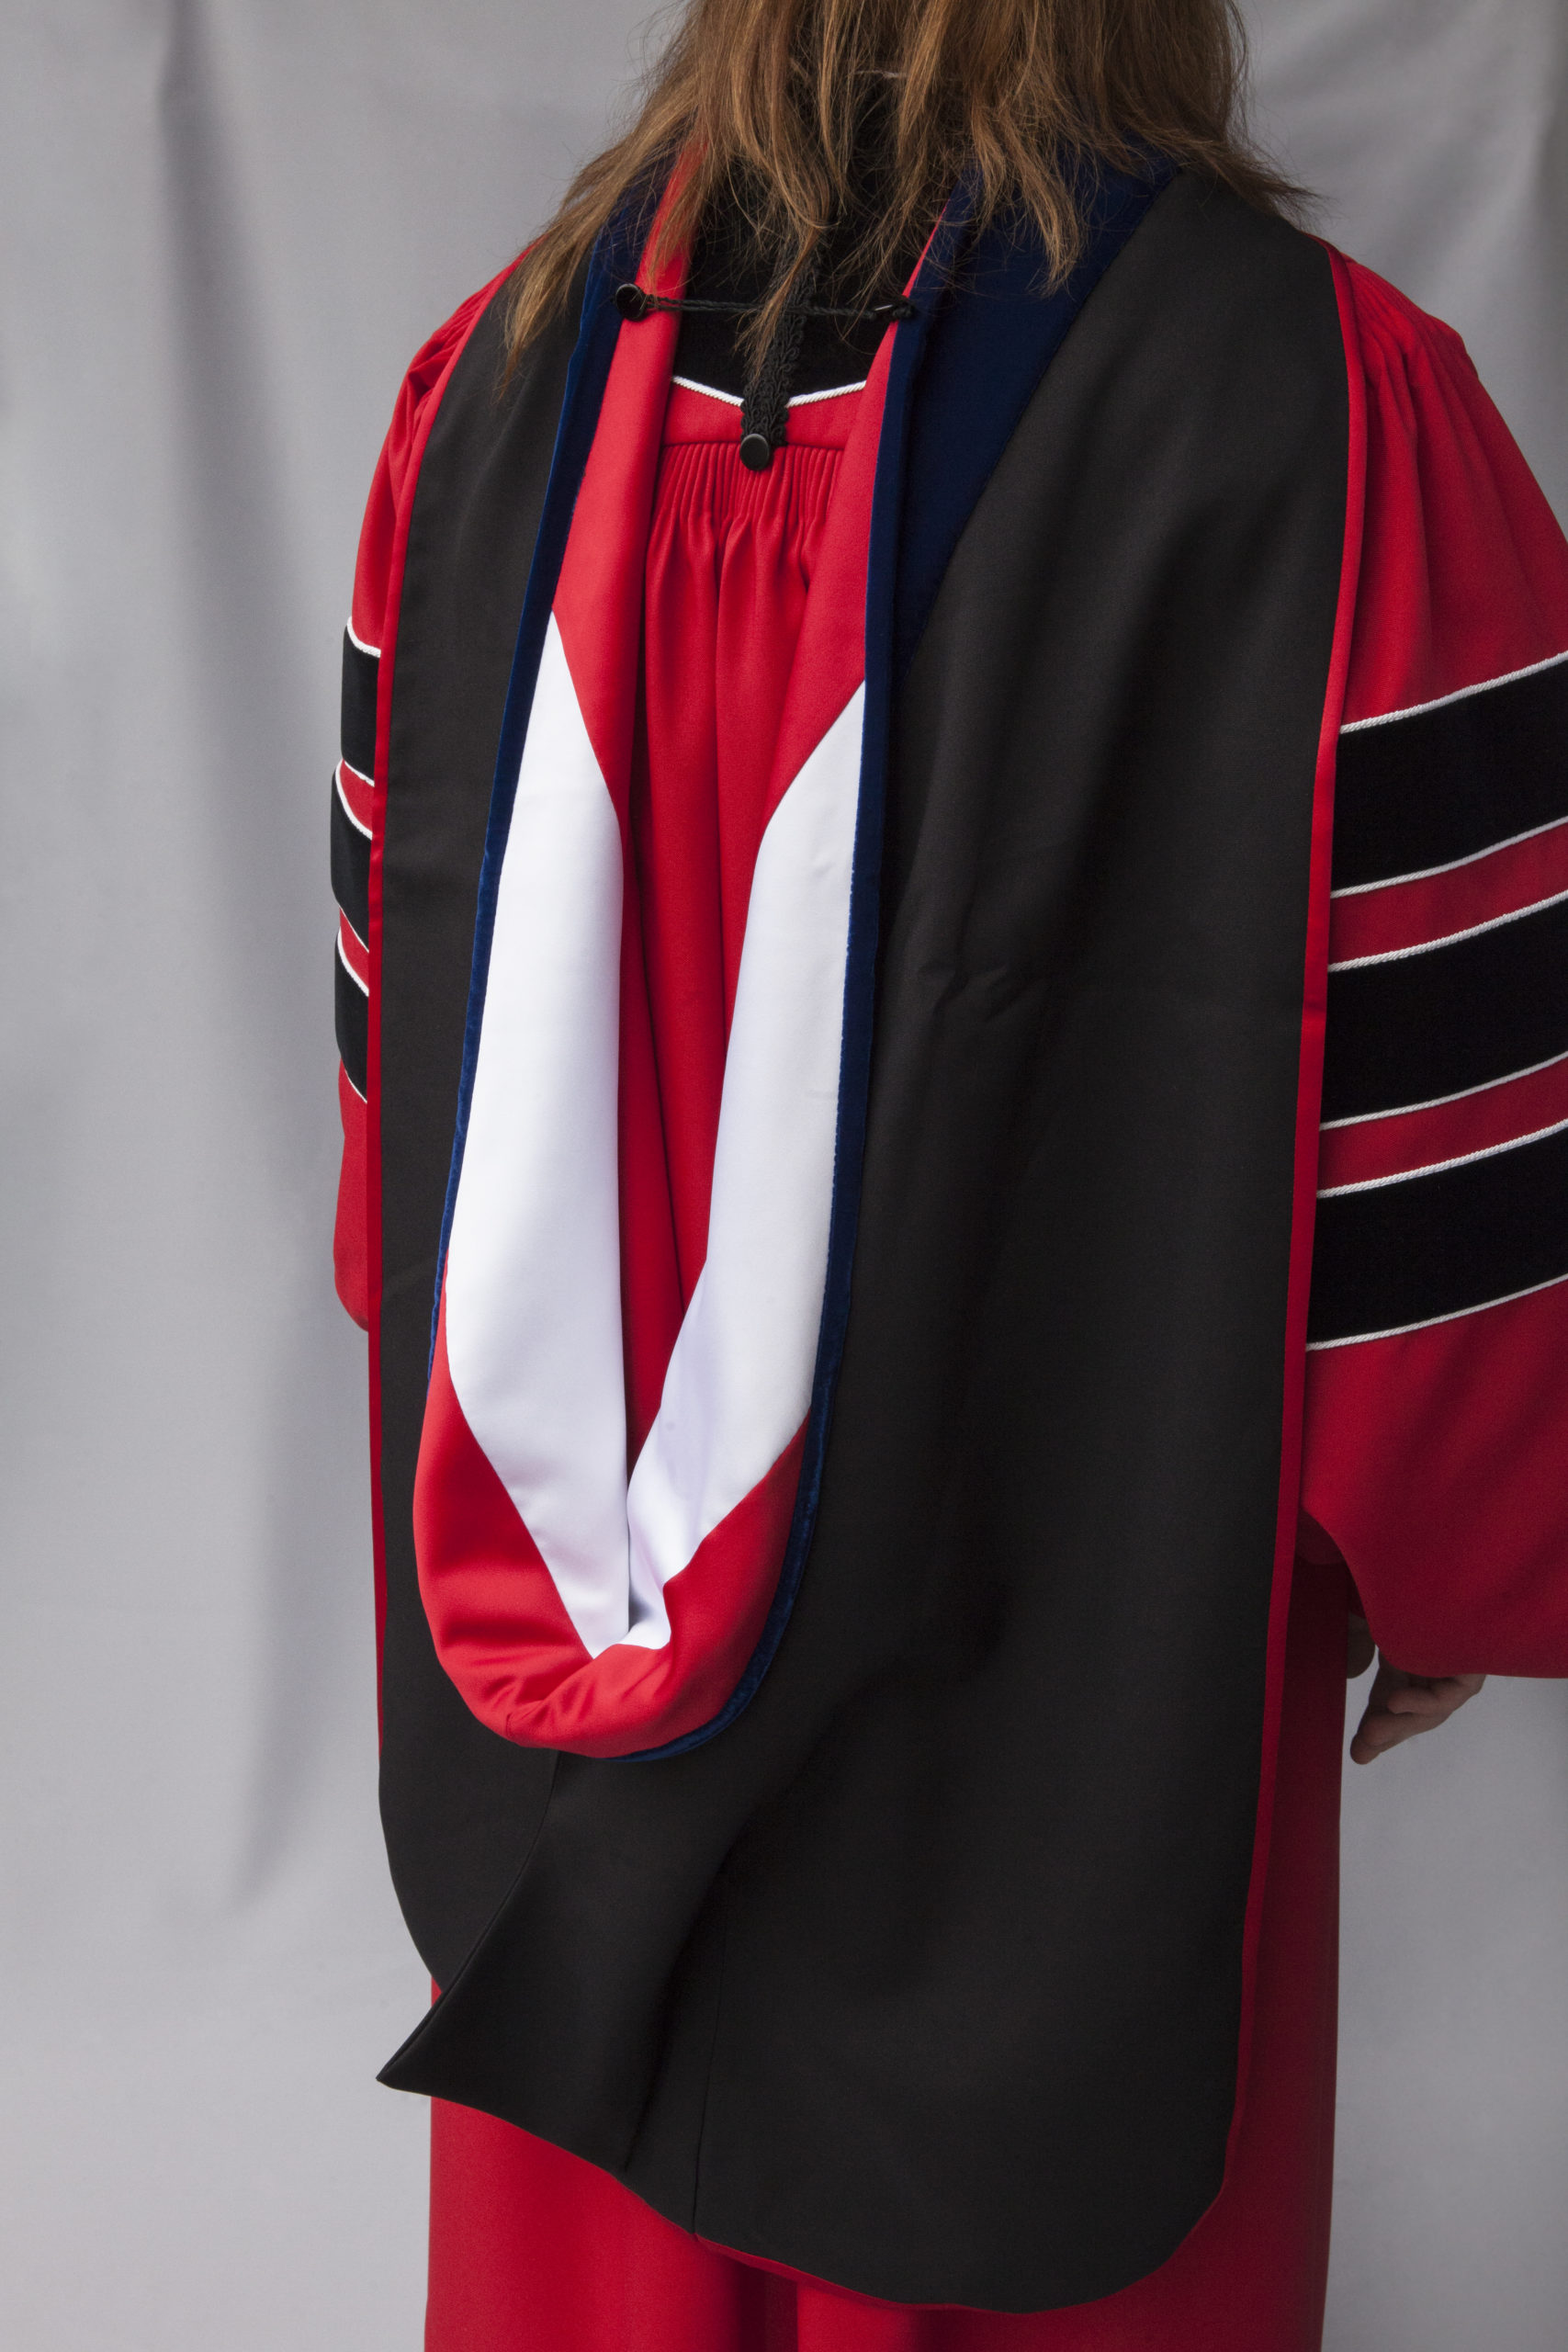 A rectangular, black velvet hood with a red field and white chevron worn by a person also wearing a Phd Red Robe with black bars on the sleeves.